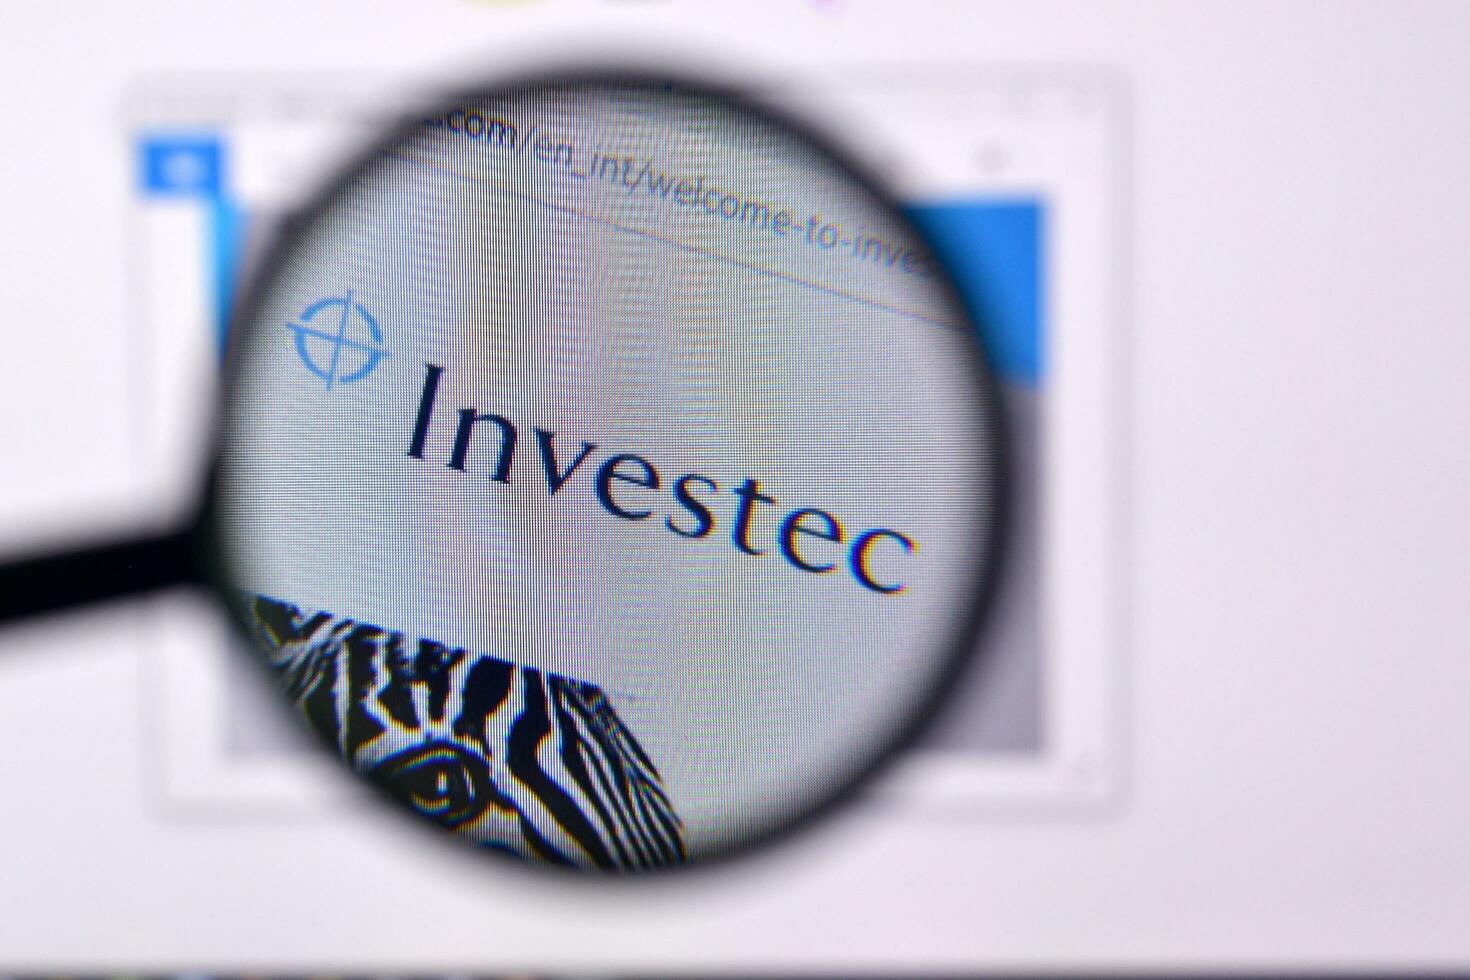 Homepage of investec website on the display of PC, url - investec.com. photo